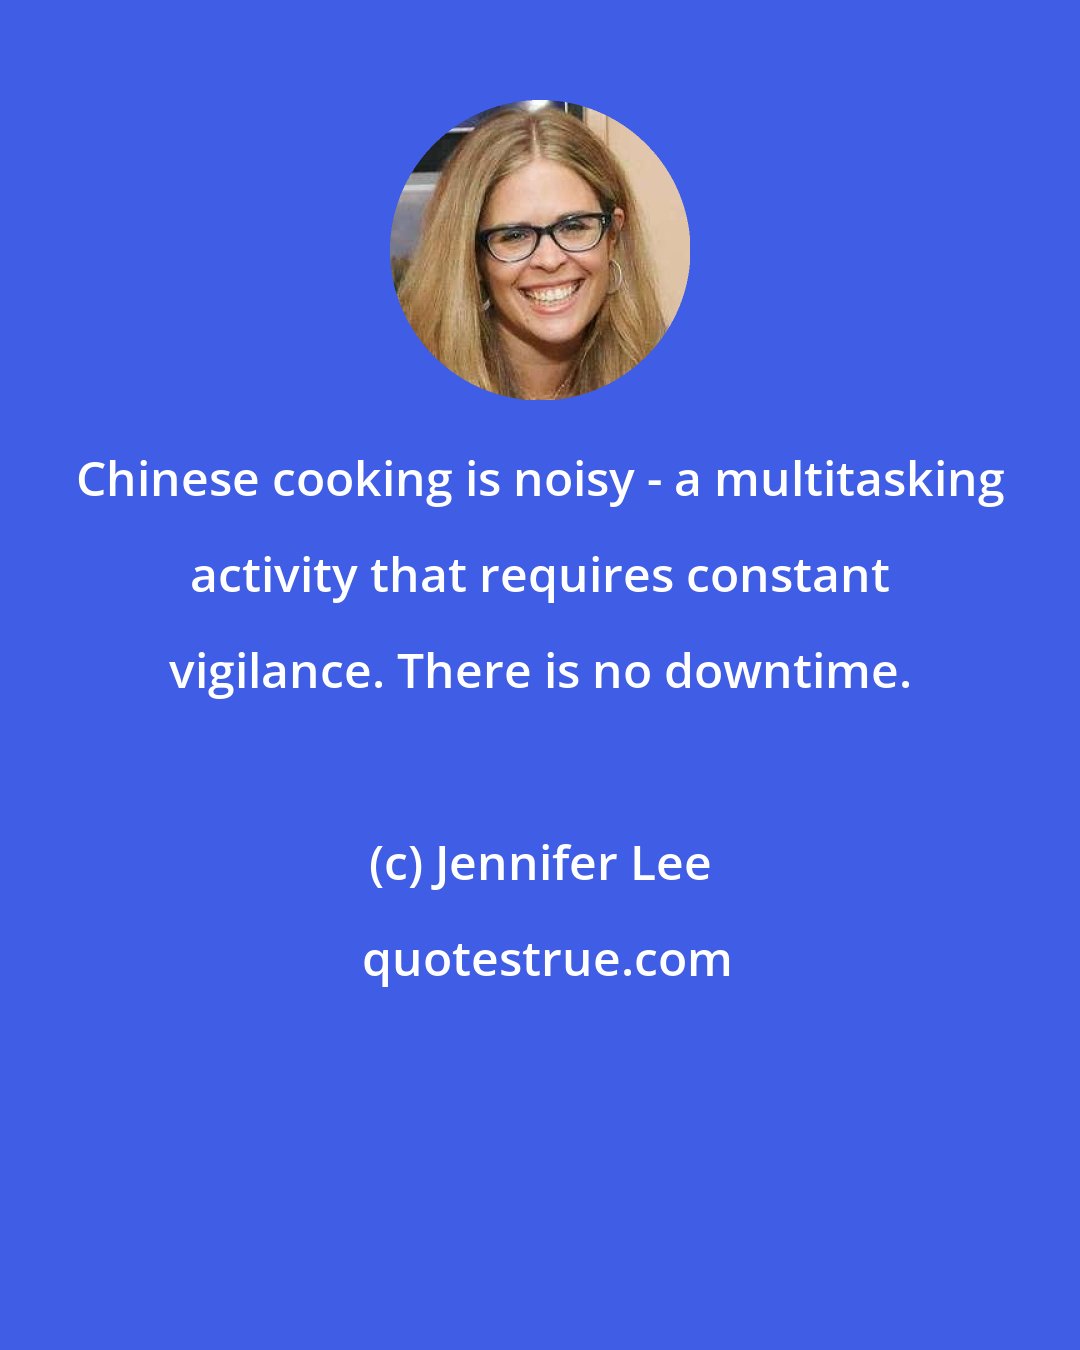 Jennifer Lee: Chinese cooking is noisy - a multitasking activity that requires constant vigilance. There is no downtime.